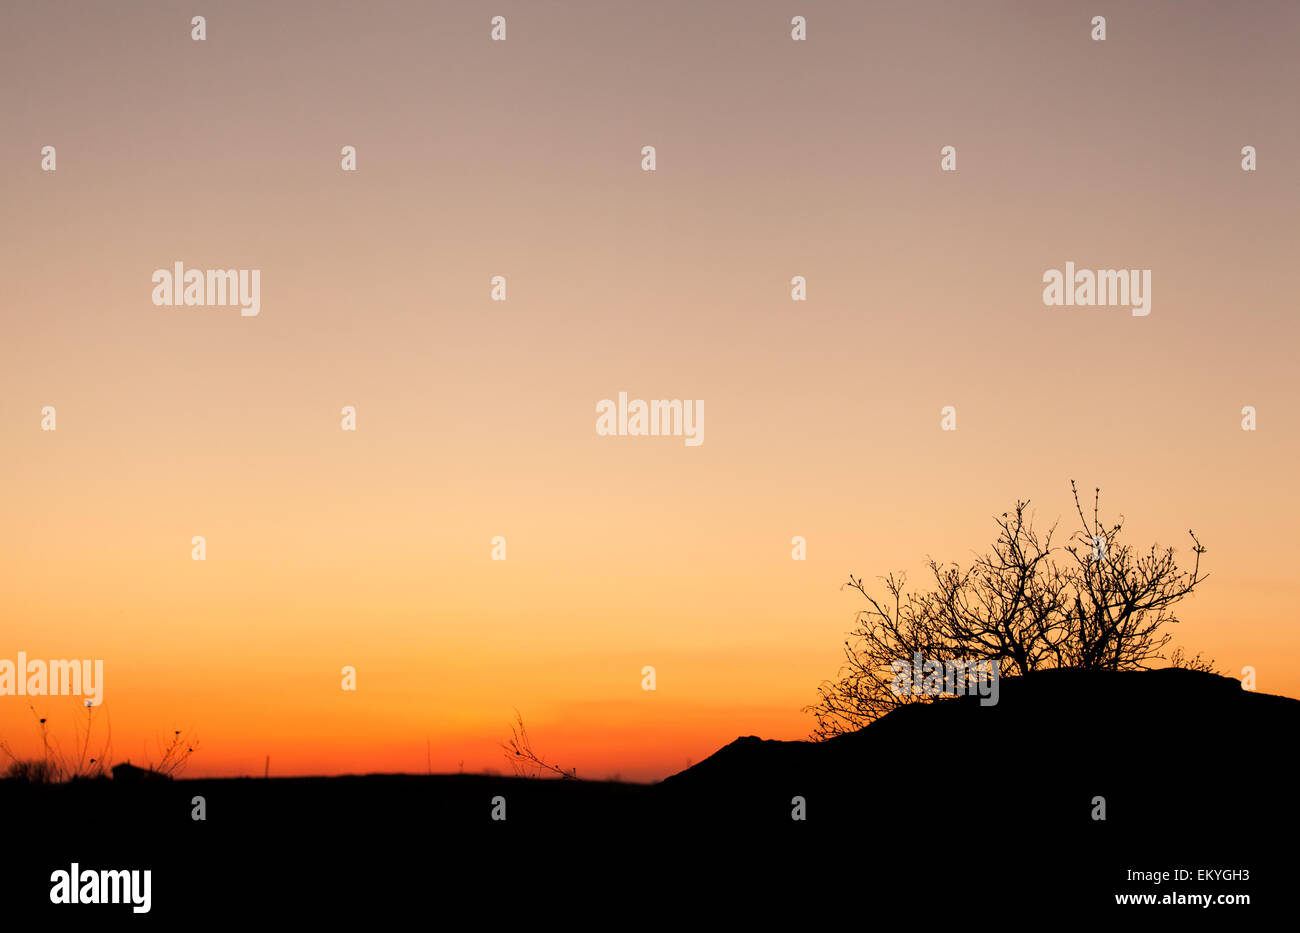 Beautiful landscape image with trees silhouette at sunset in spring in Ukraine Stock Photo